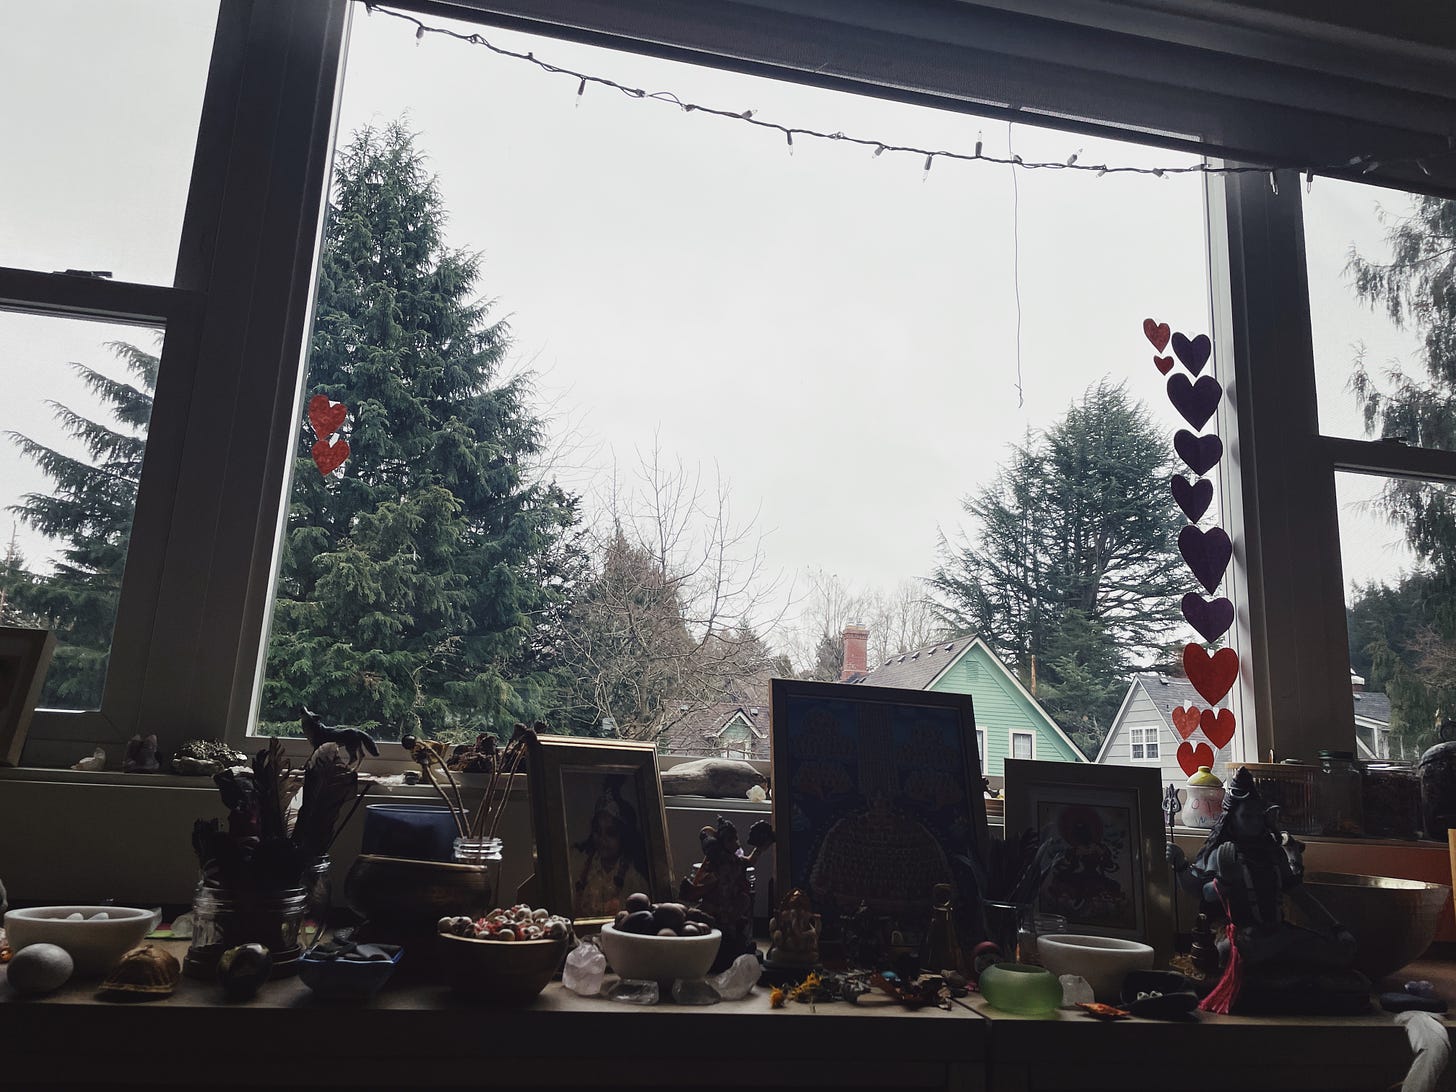 Altar of natural items and photos and hearts, trees and gray-white sky in the background